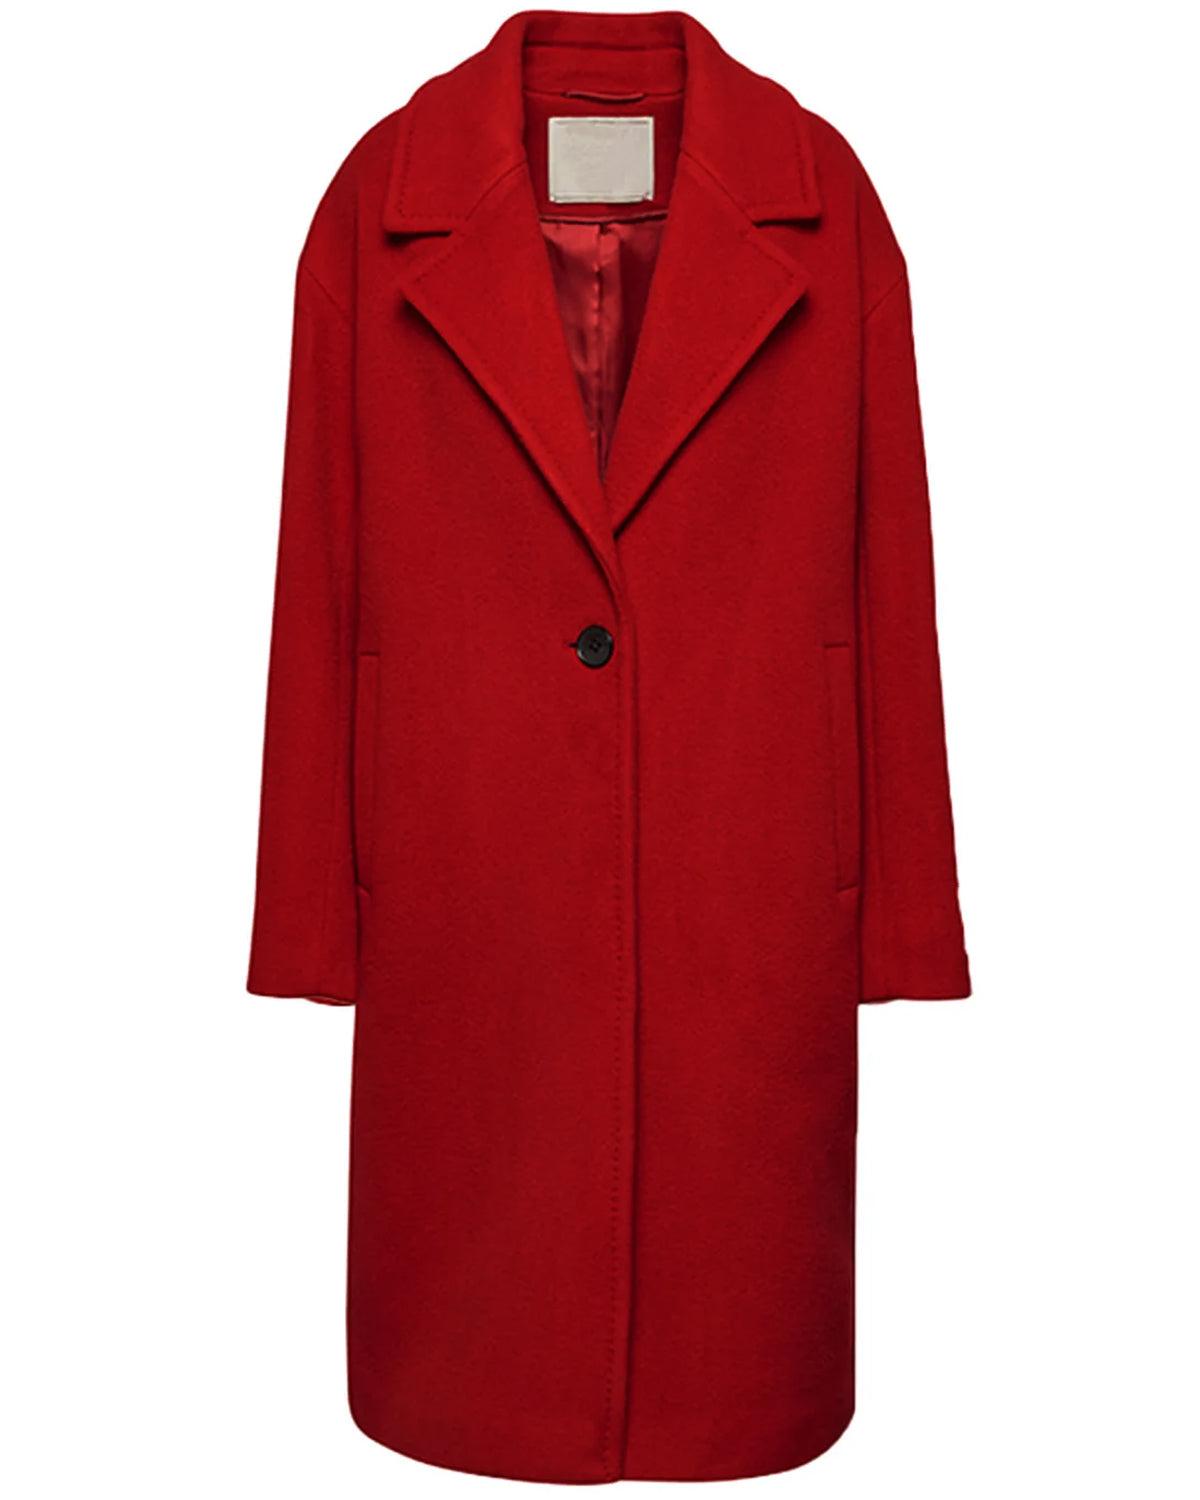 Tis The Season To Be Merry TV Show Merry Griffin Trench Coat 